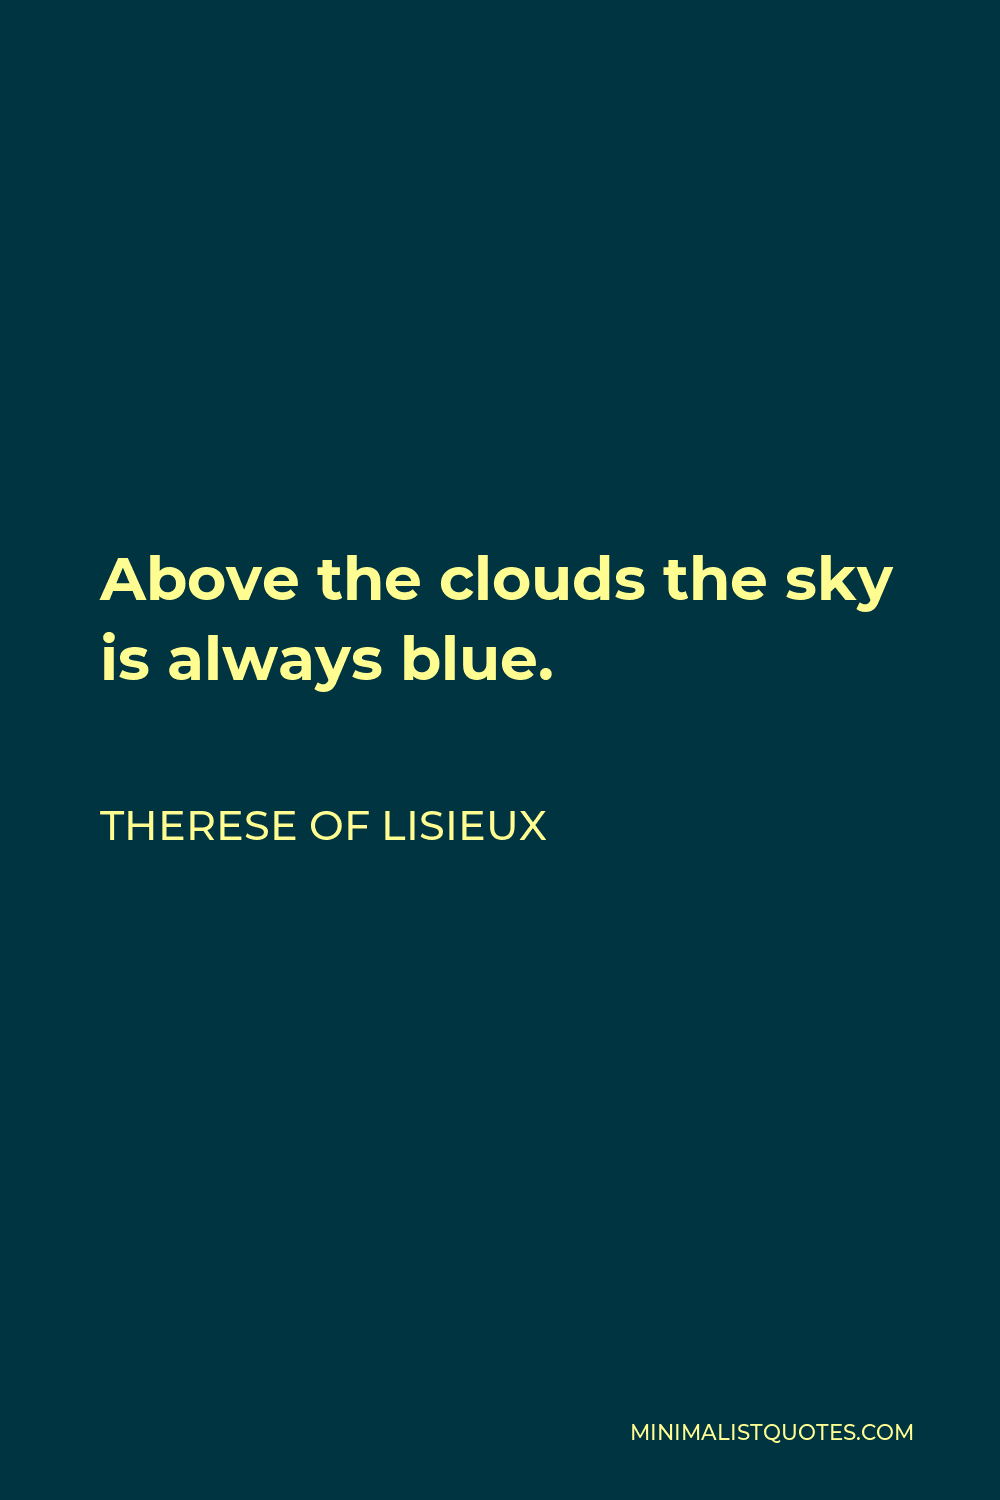 Therese of Lisieux Quote - Above the clouds the sky is always blue.